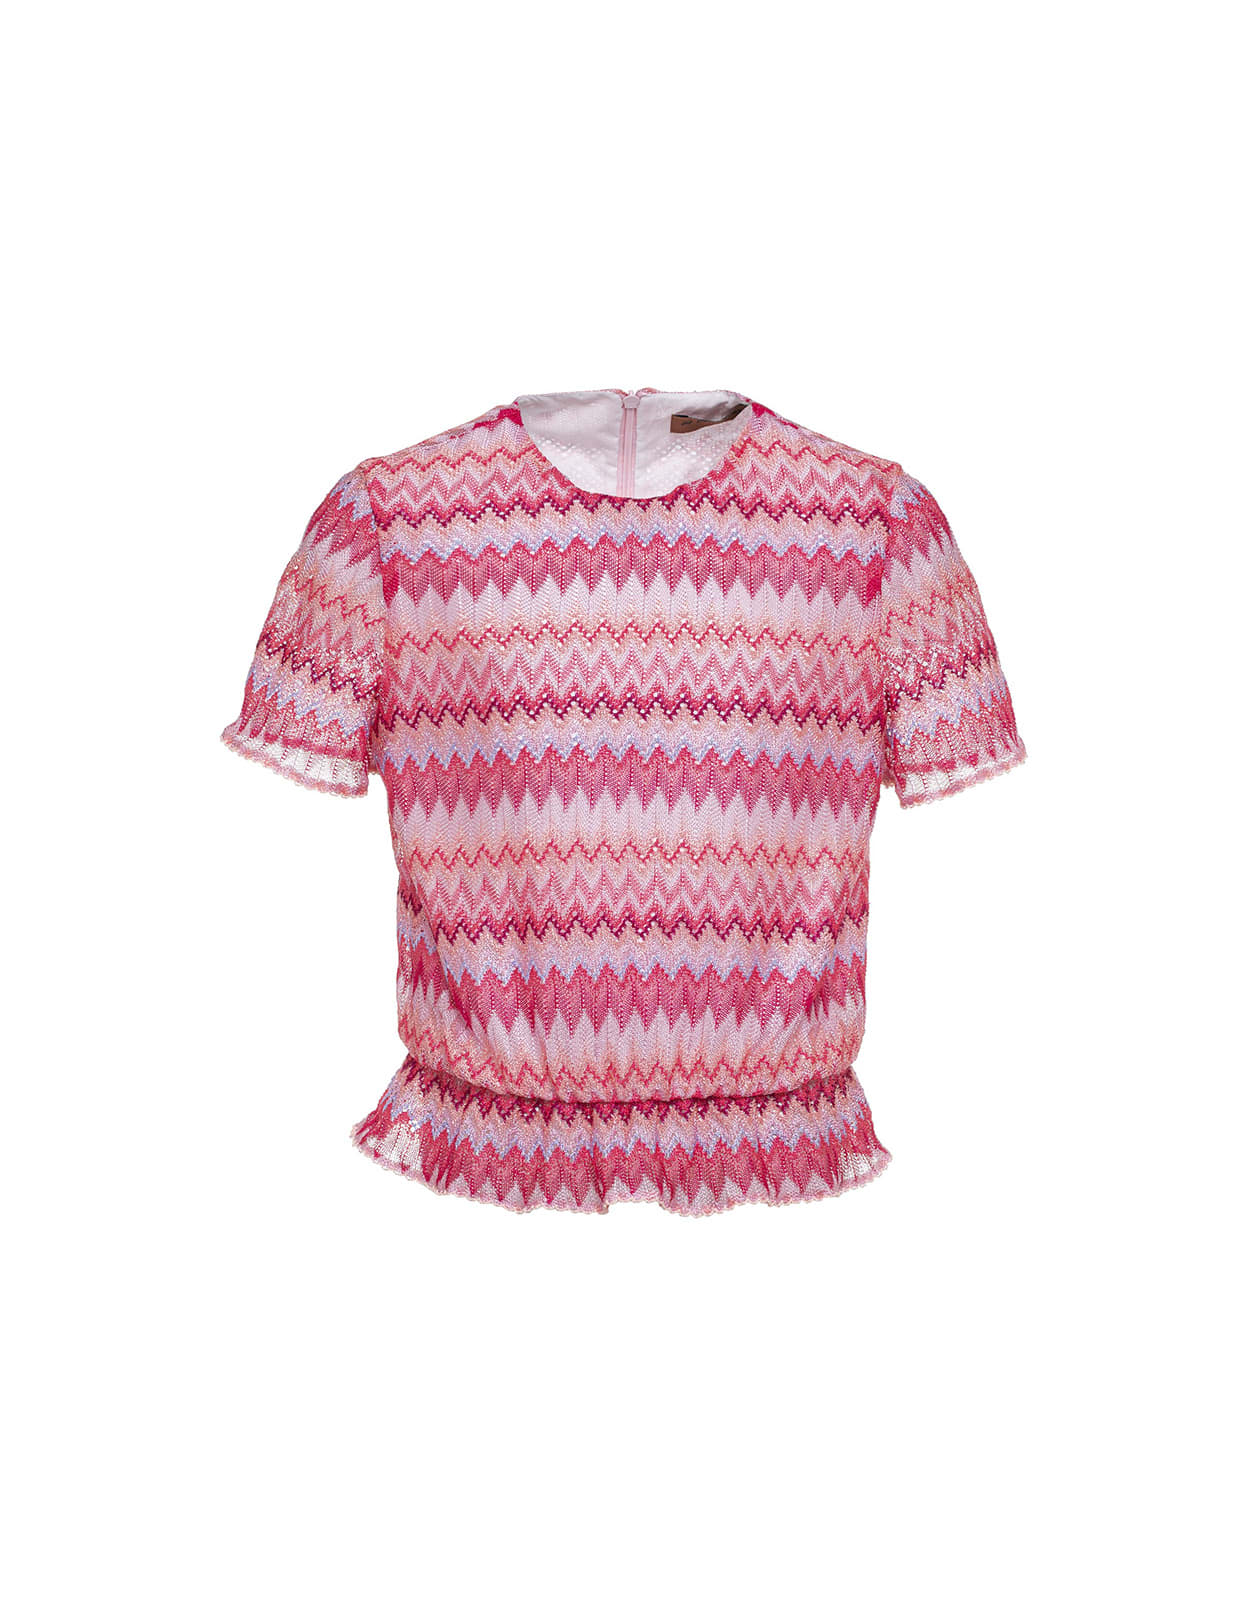 MISSONI PINK KNIT TOP WITH ZIG-ZAG PATTERN